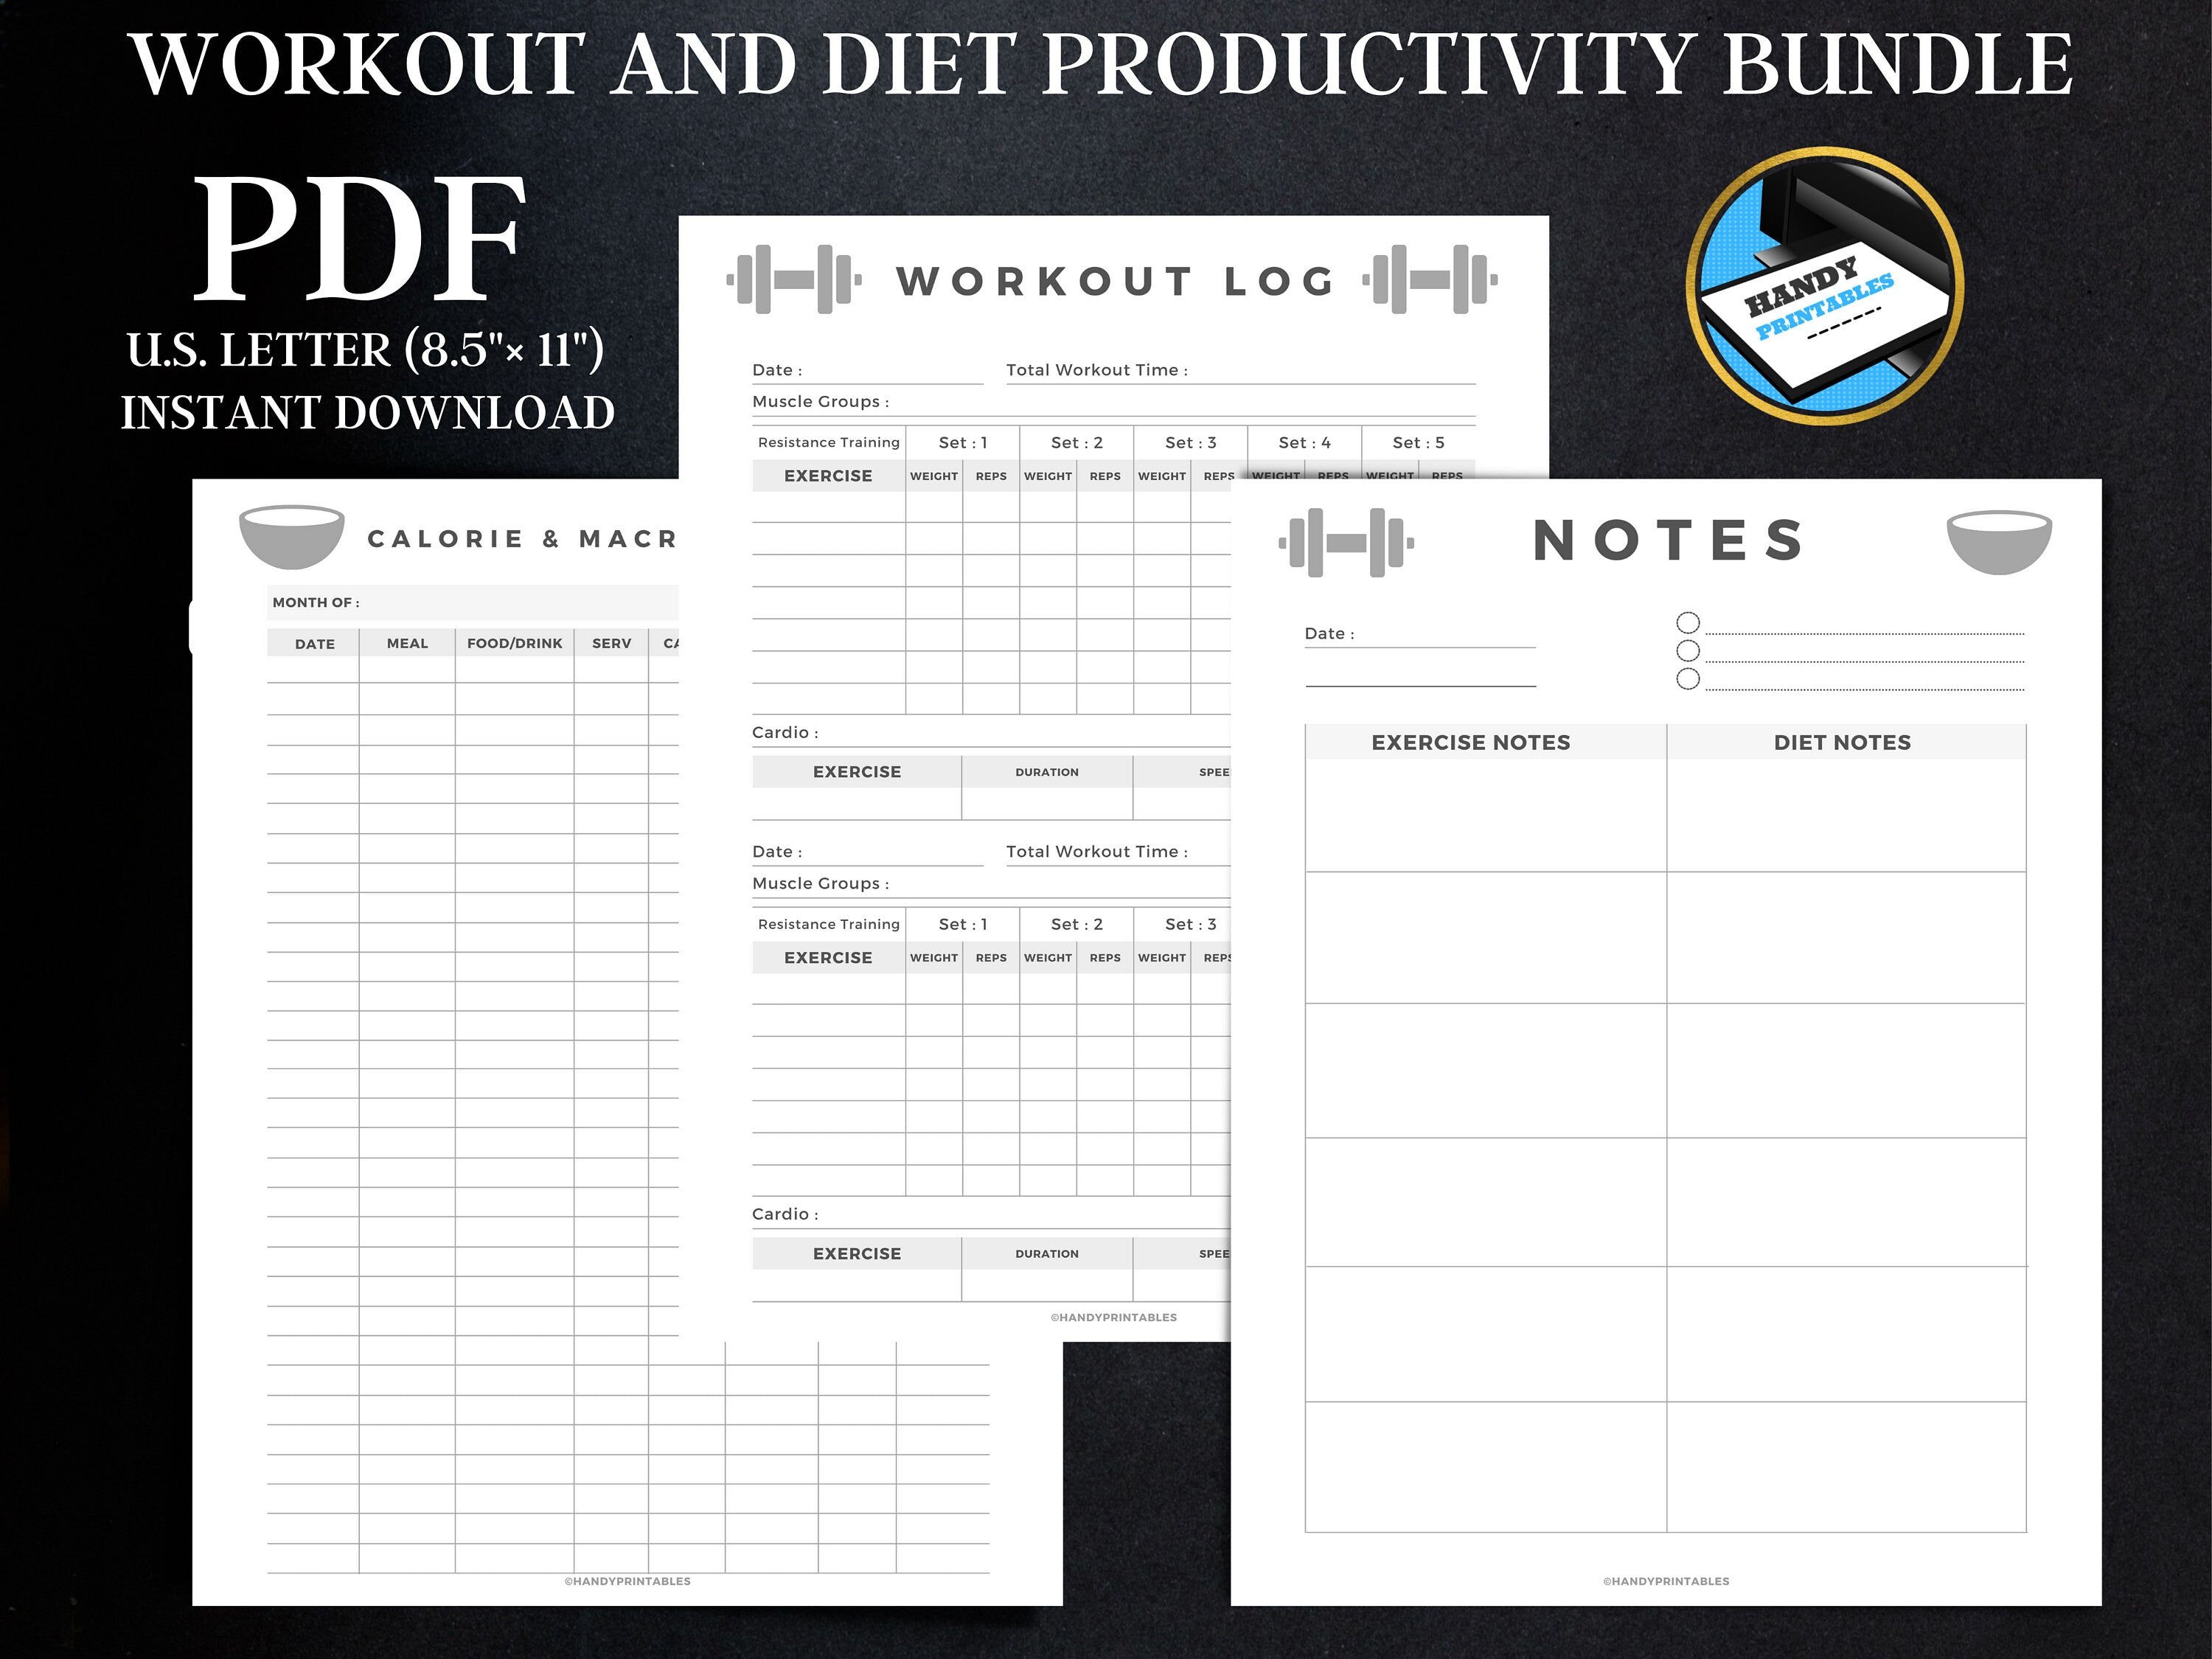 Workout and Meal Planner, Workout Log Printable, Workout and Diet Productivity Bundle, Calorie Tracker, Fitness Planner, Workout Tracker - HandyPrintables